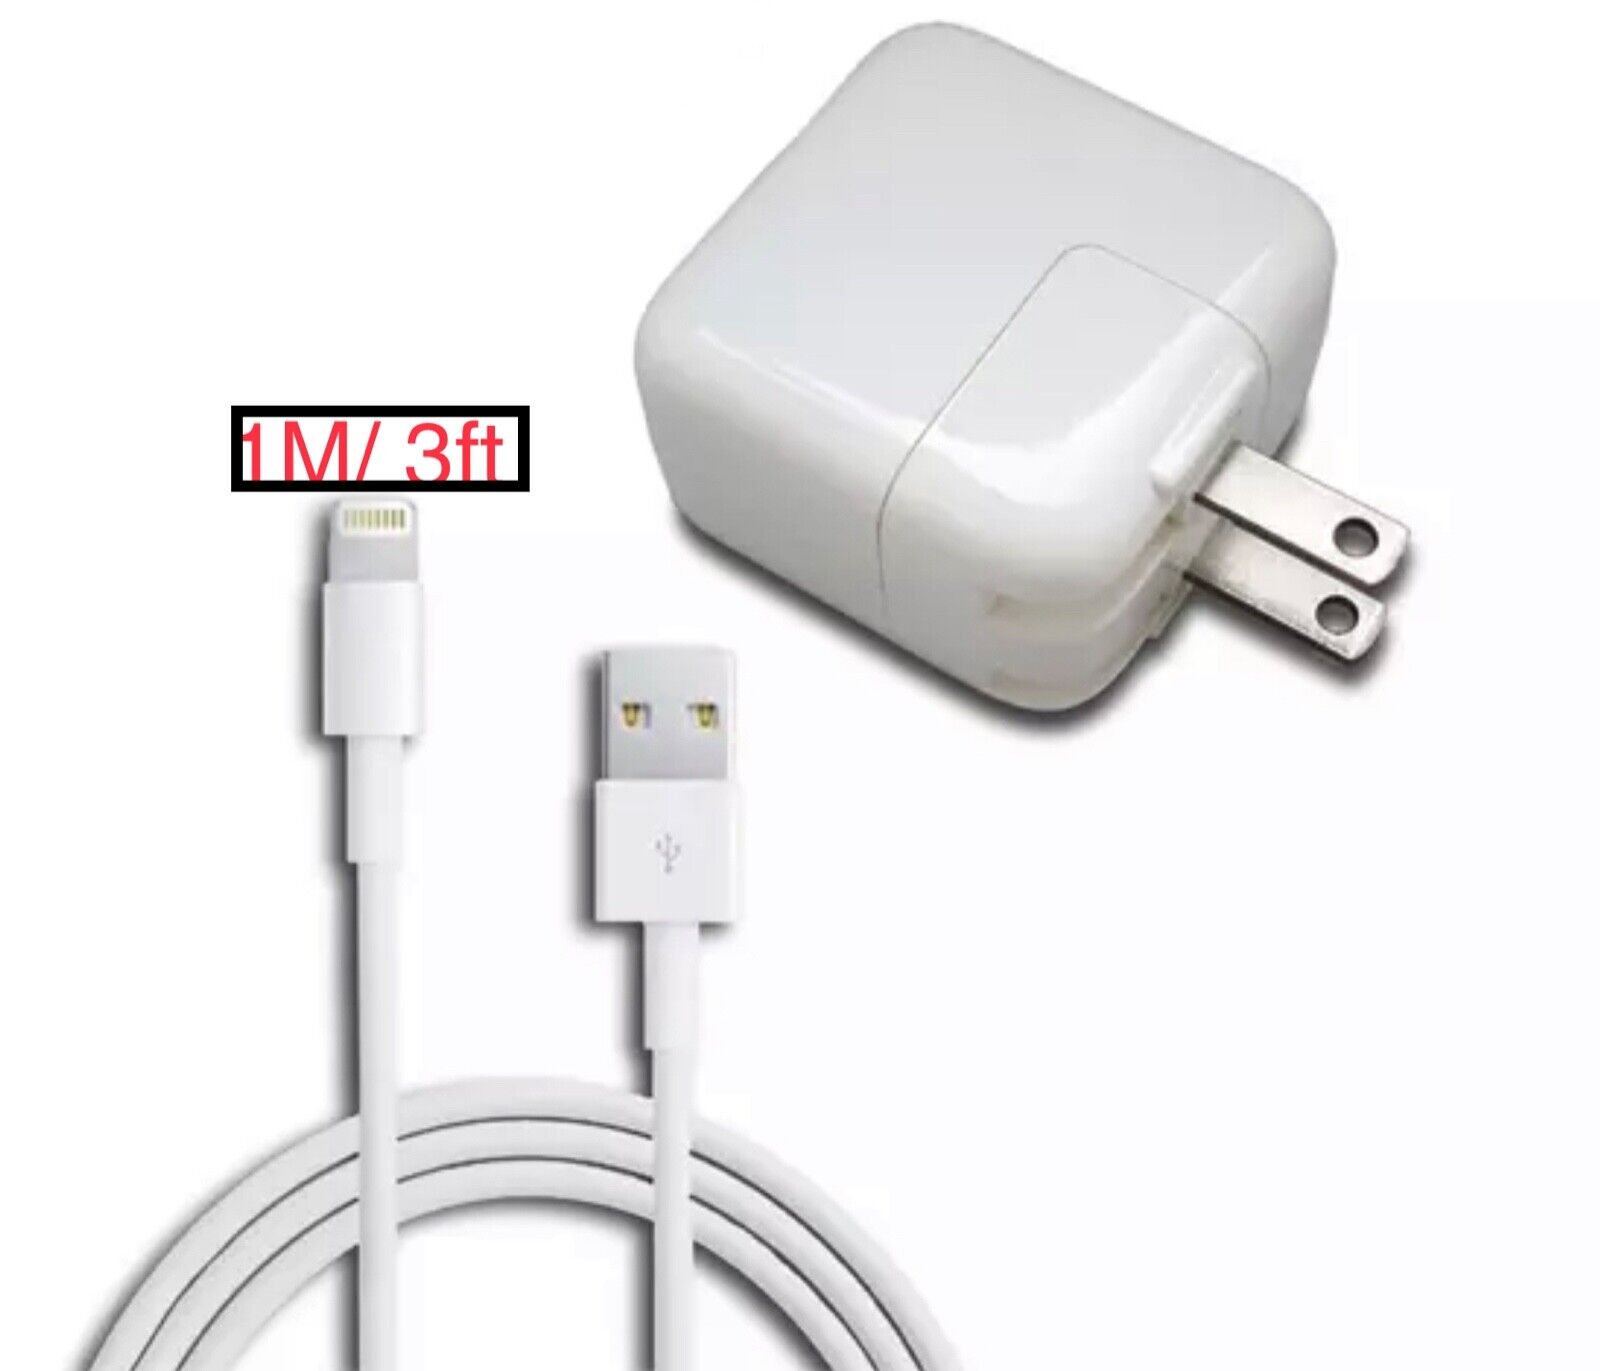 12W USB Power Adapter Charger for iPhone 8 7 X iPad 2 3 4 Air 1M2M3M Cable Cord